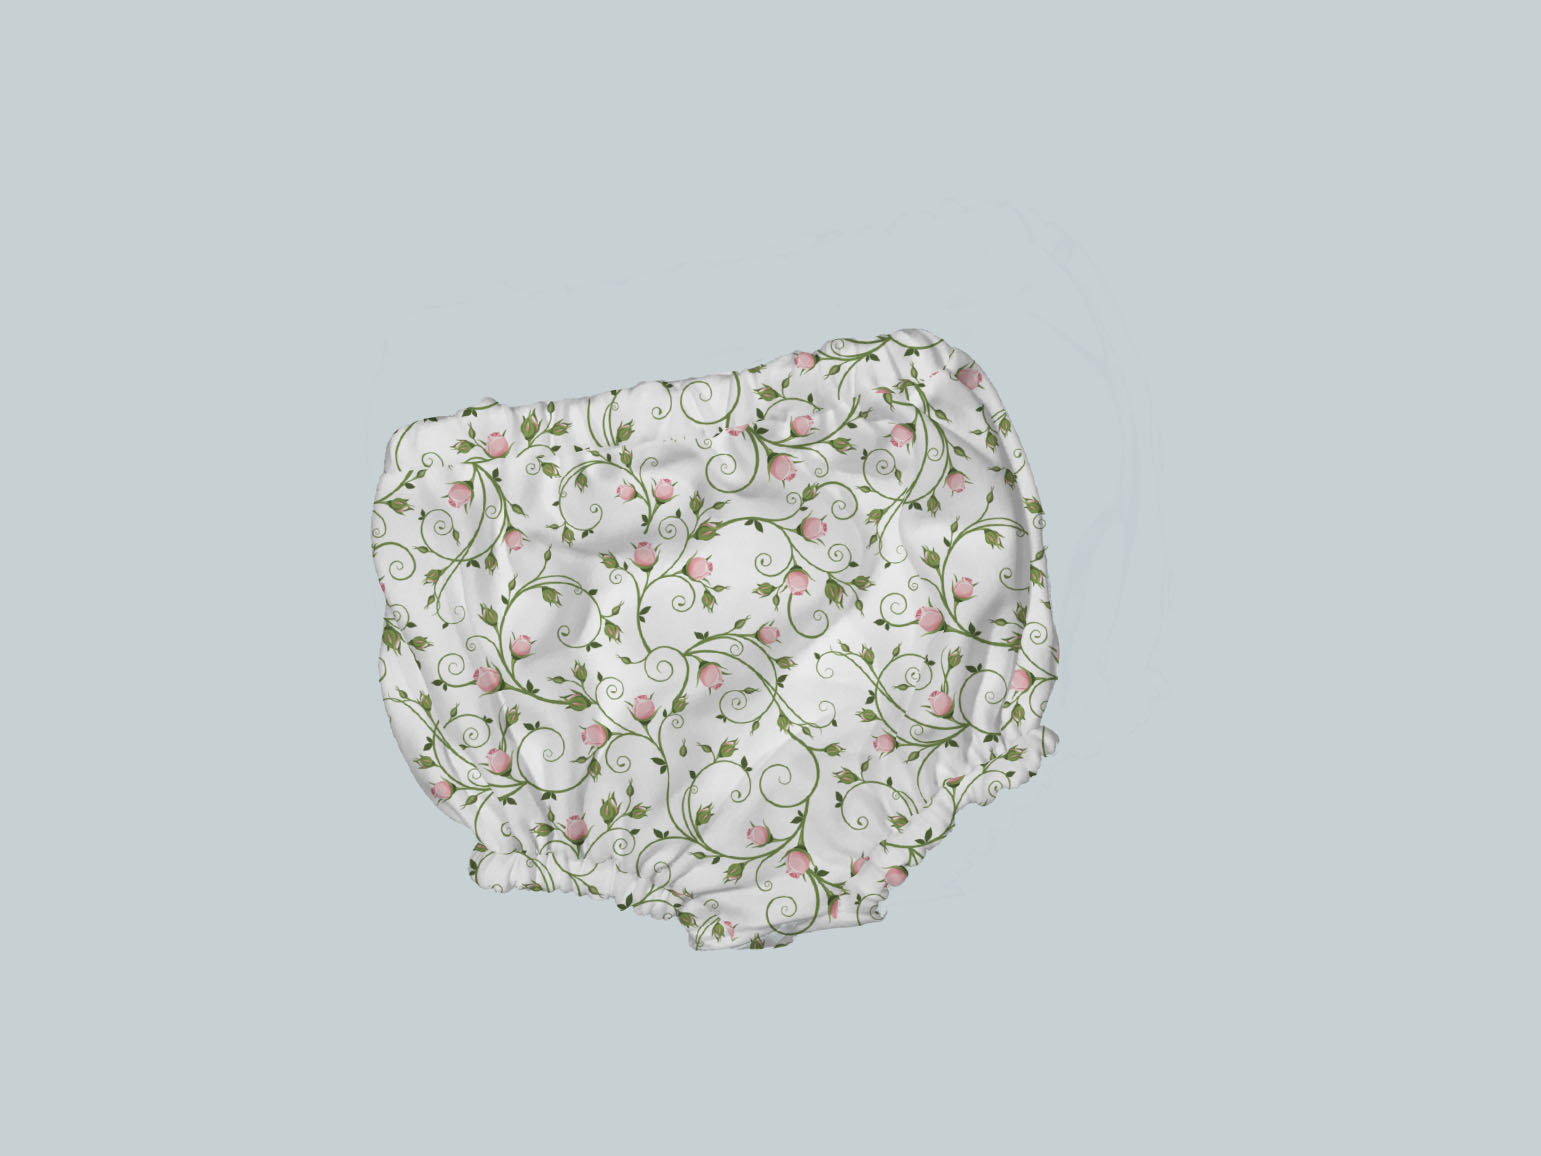 Bummies/Diaper Cover - Vine and Roses